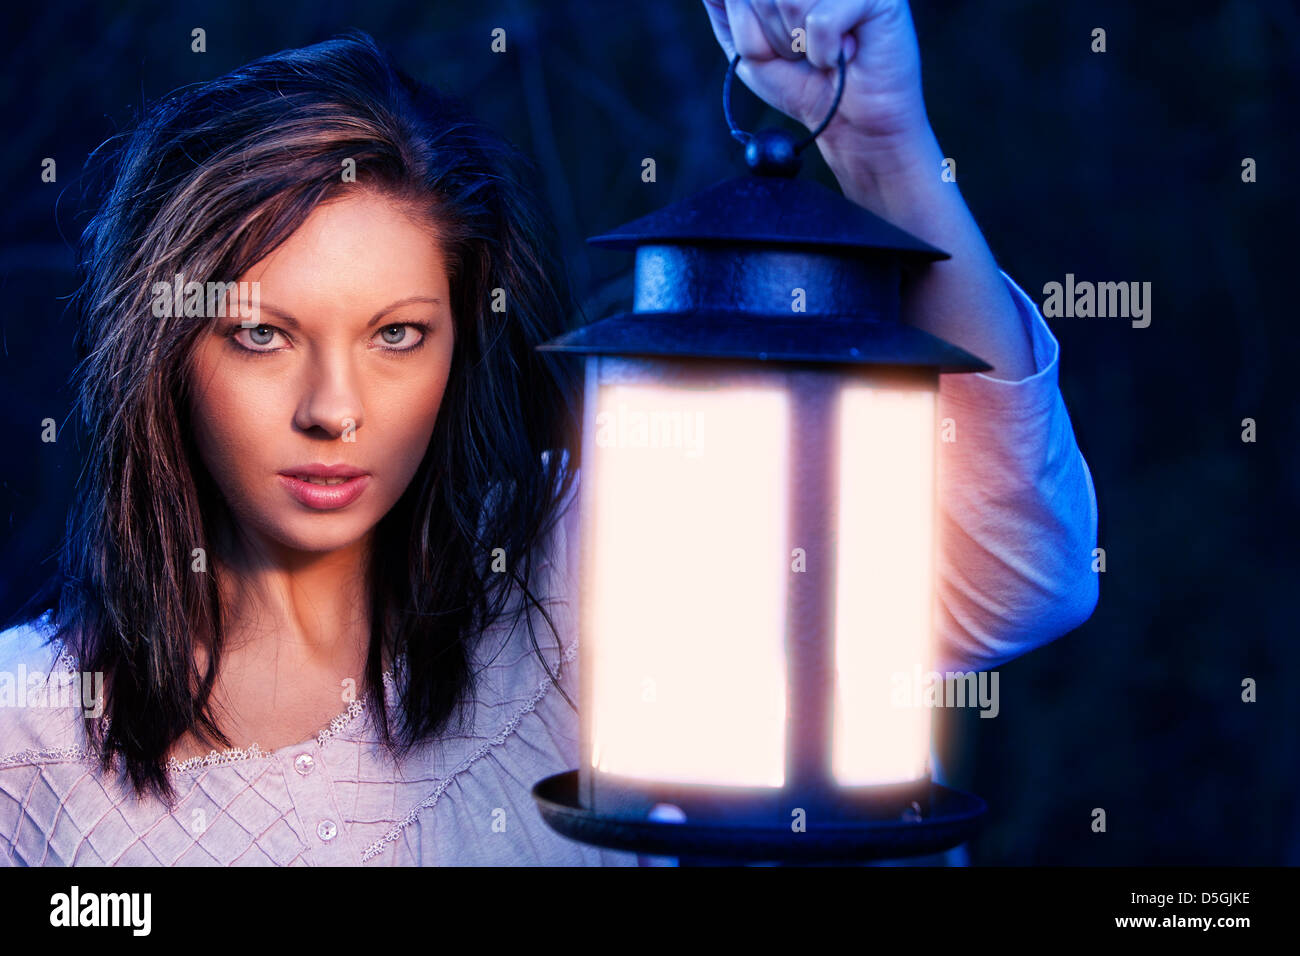 Woman with lantern in blue light Stock Photo